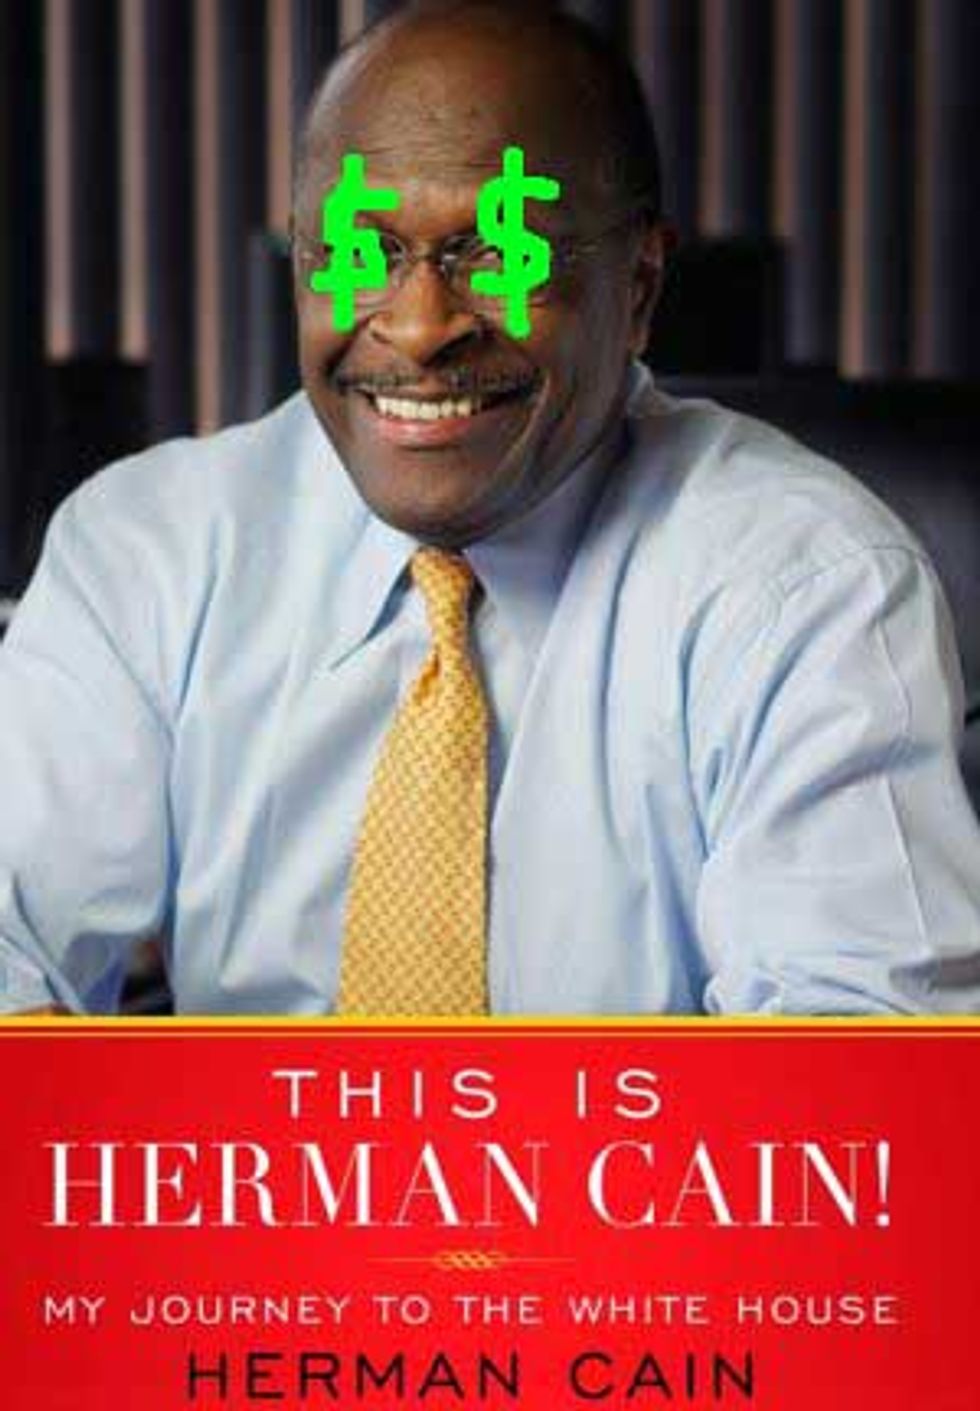 Grifter Herman Cain Sold Campaign $100k Worth of His Own Books